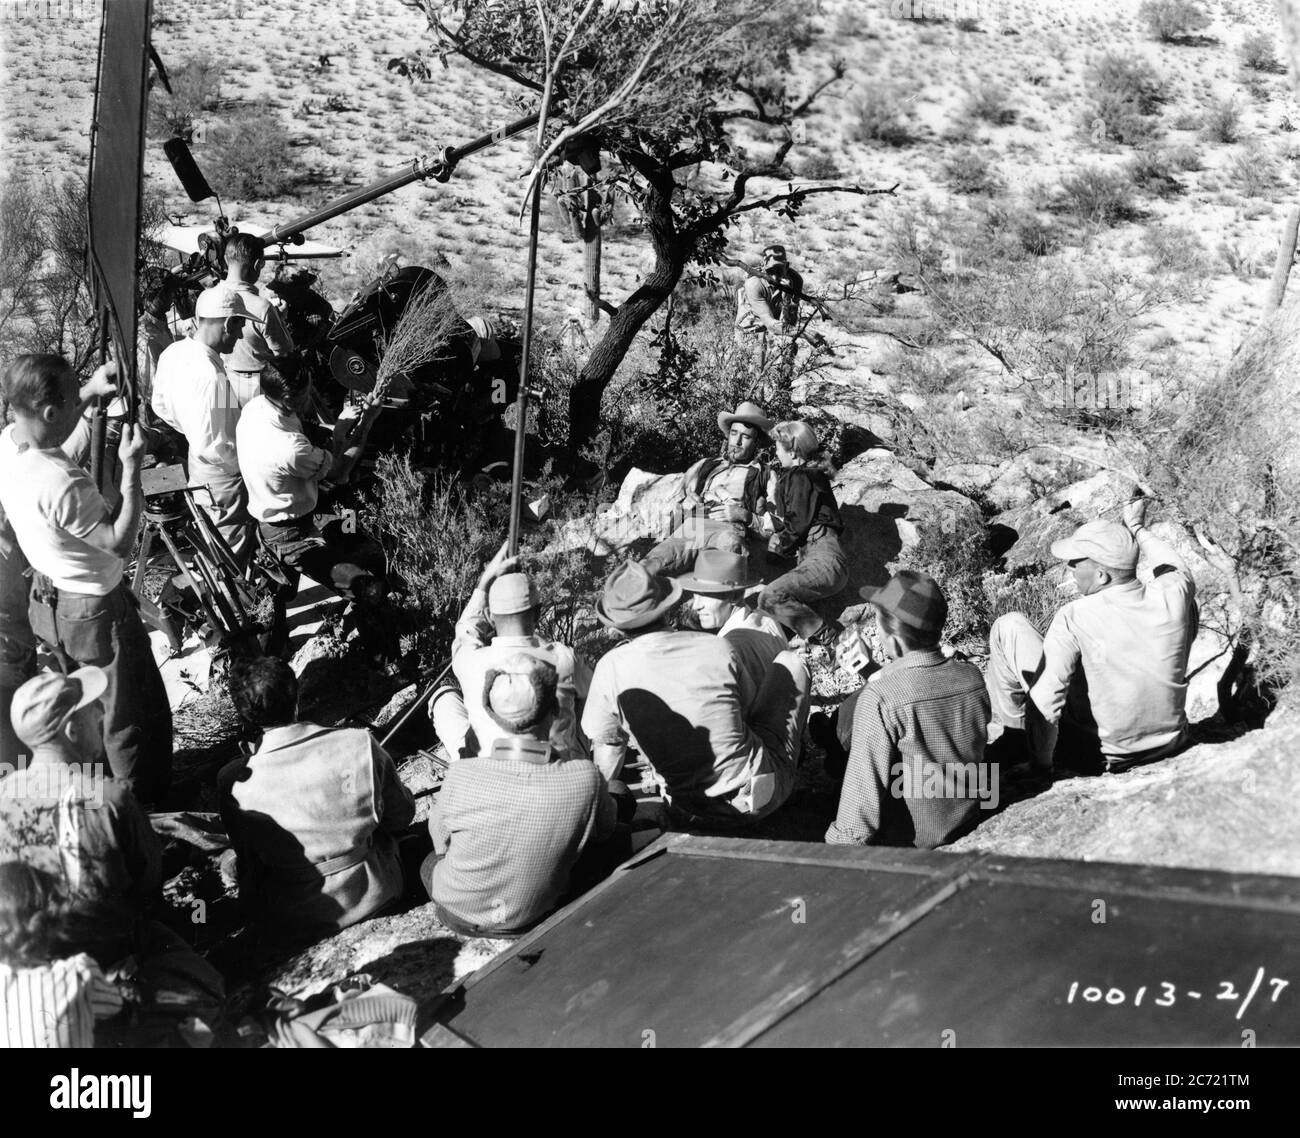 Director ANTHONY MANN and Film Crew  filming GILBERT ROLAND and BARBARA STANWYCK on set location candid for THE FURIES 1950 novel Niven Busch producer Hal B. Wallis Wallis - Hazen / Paramount Pictures Stock Photo